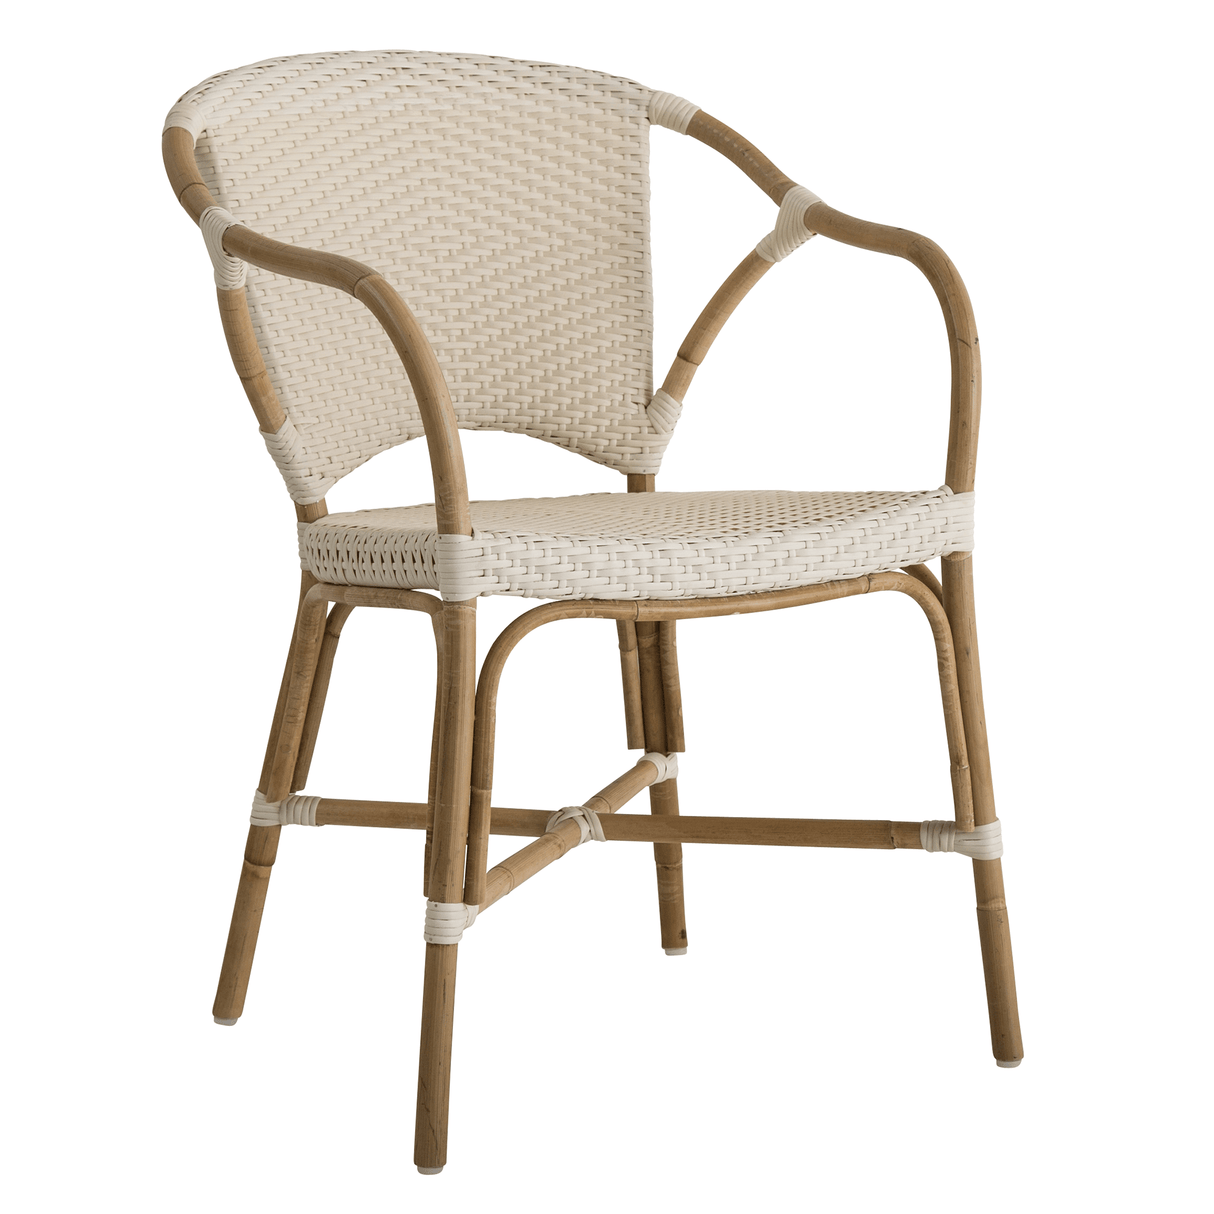 Sika Design Valerie Chair - Ivory Furniture sika-9176IVIV